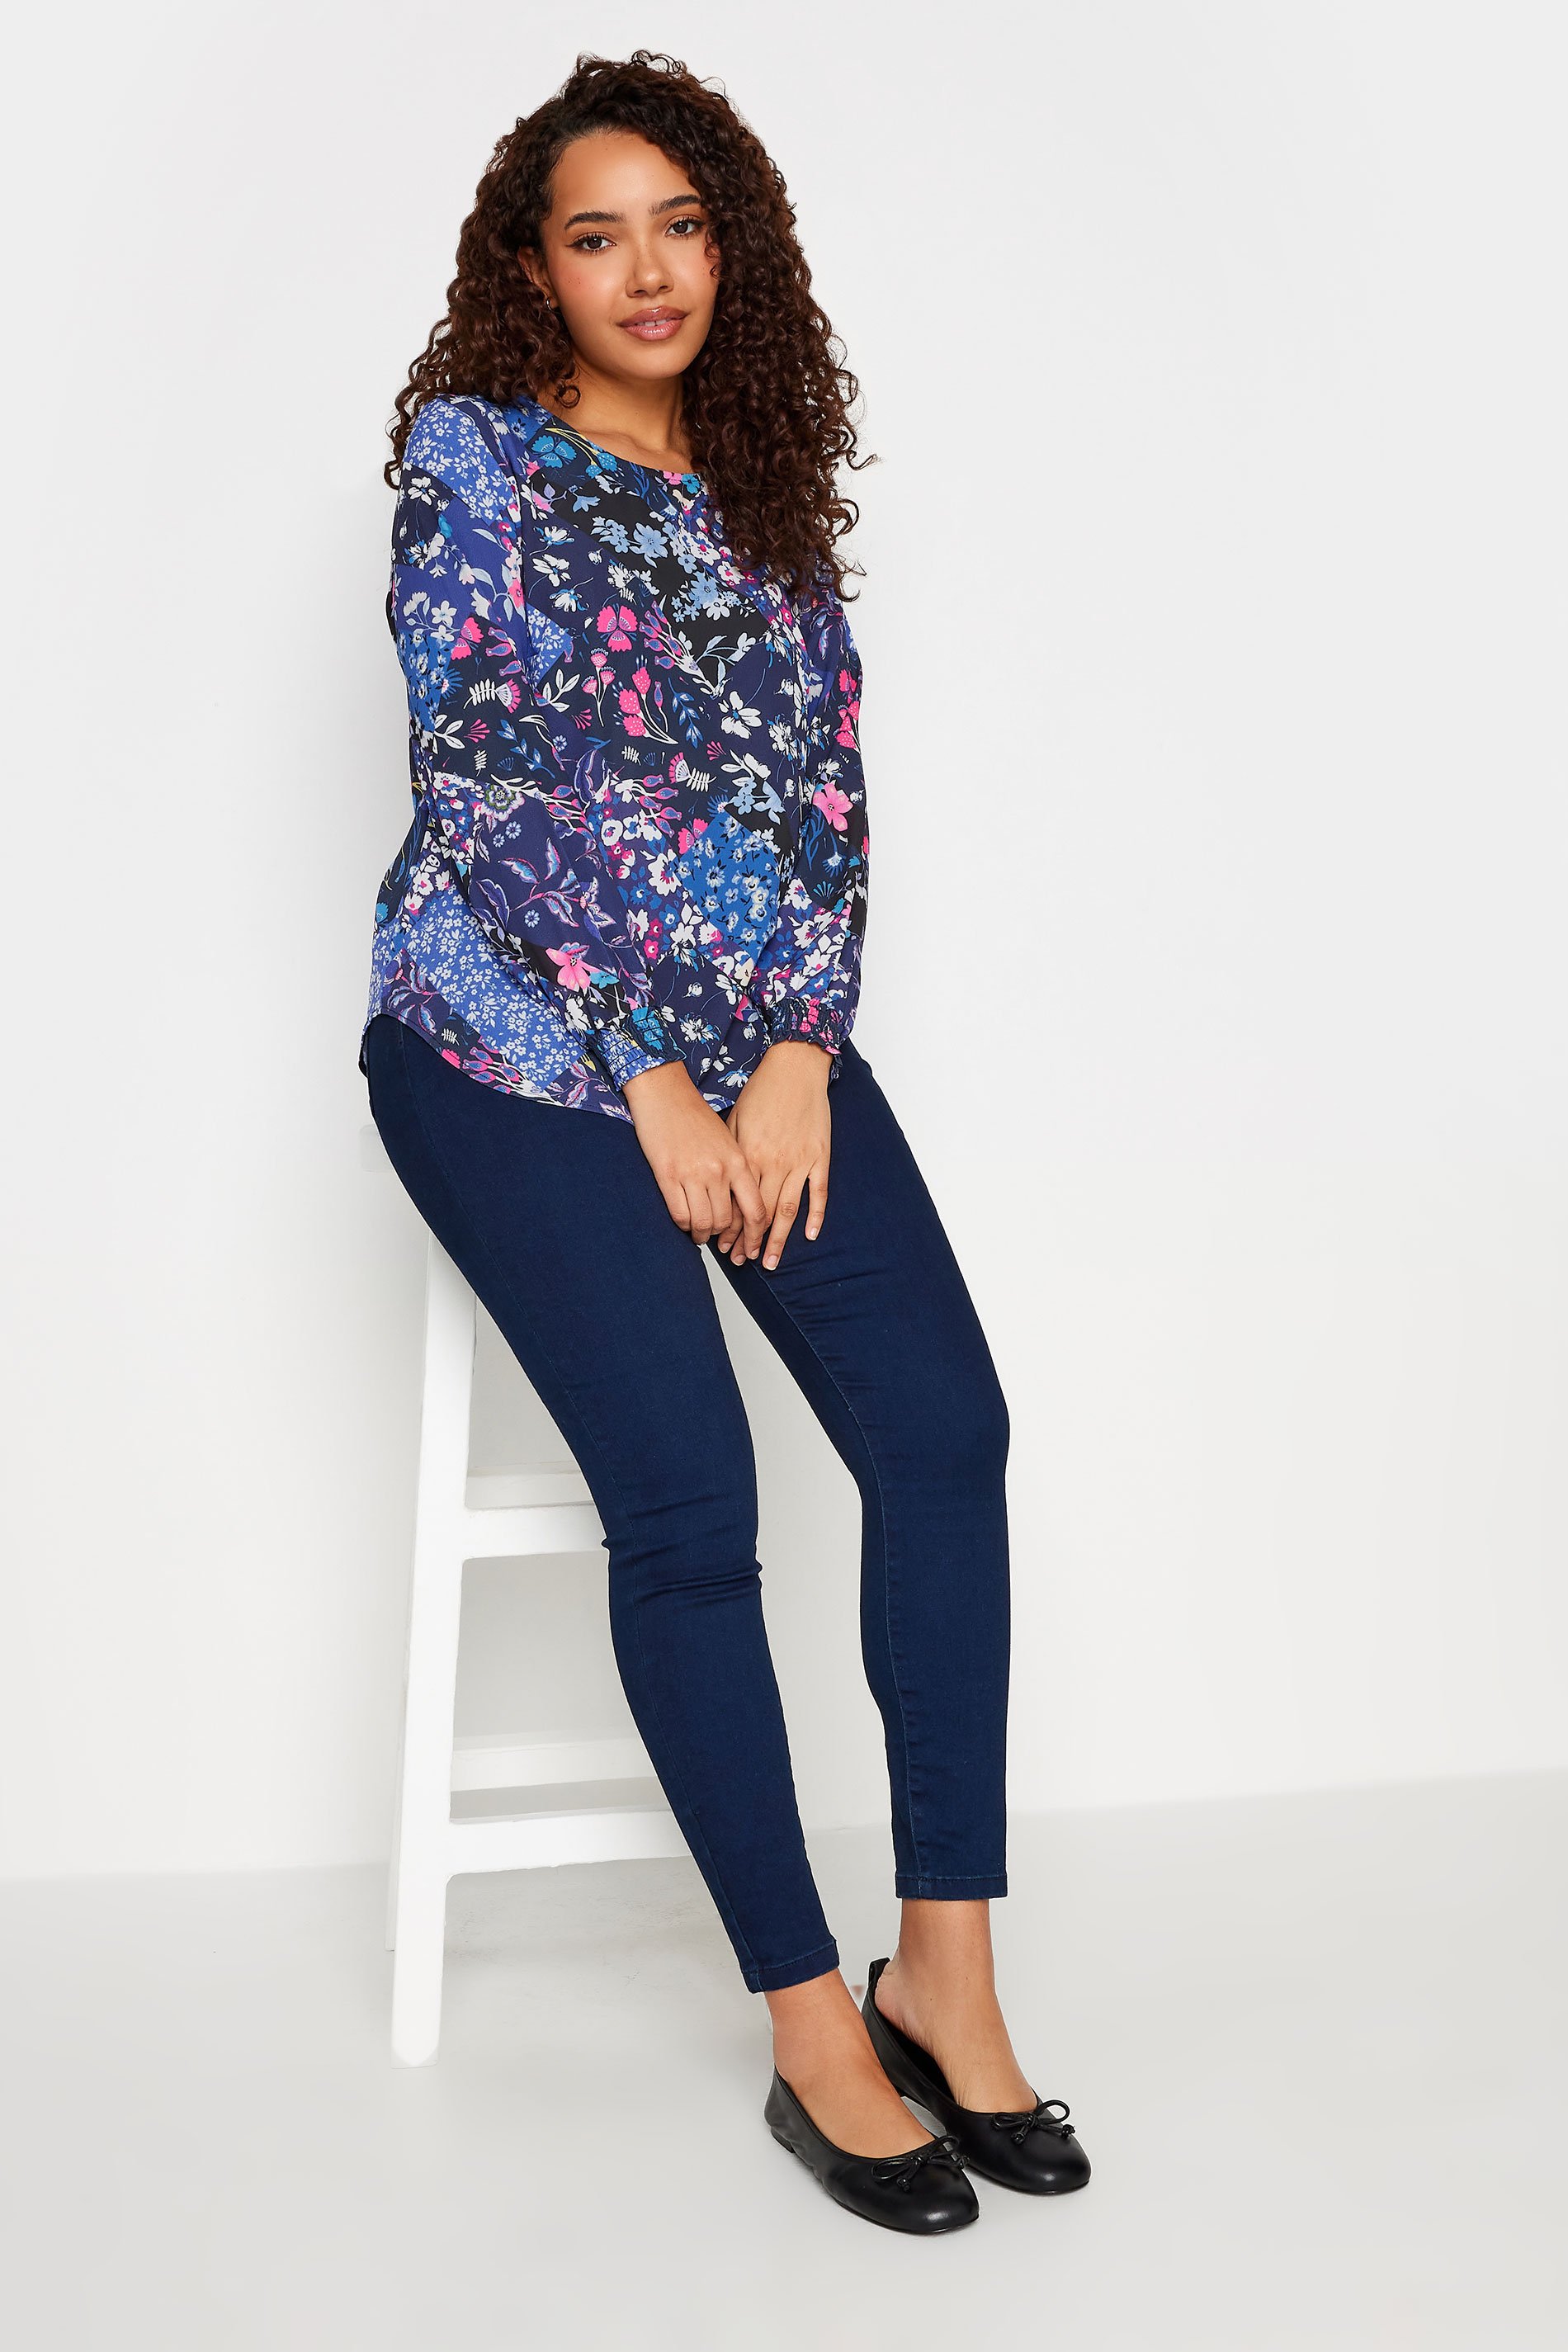 M&Co Navy Blue Floral Print Shirred Cuff Blouse | M&Co 2